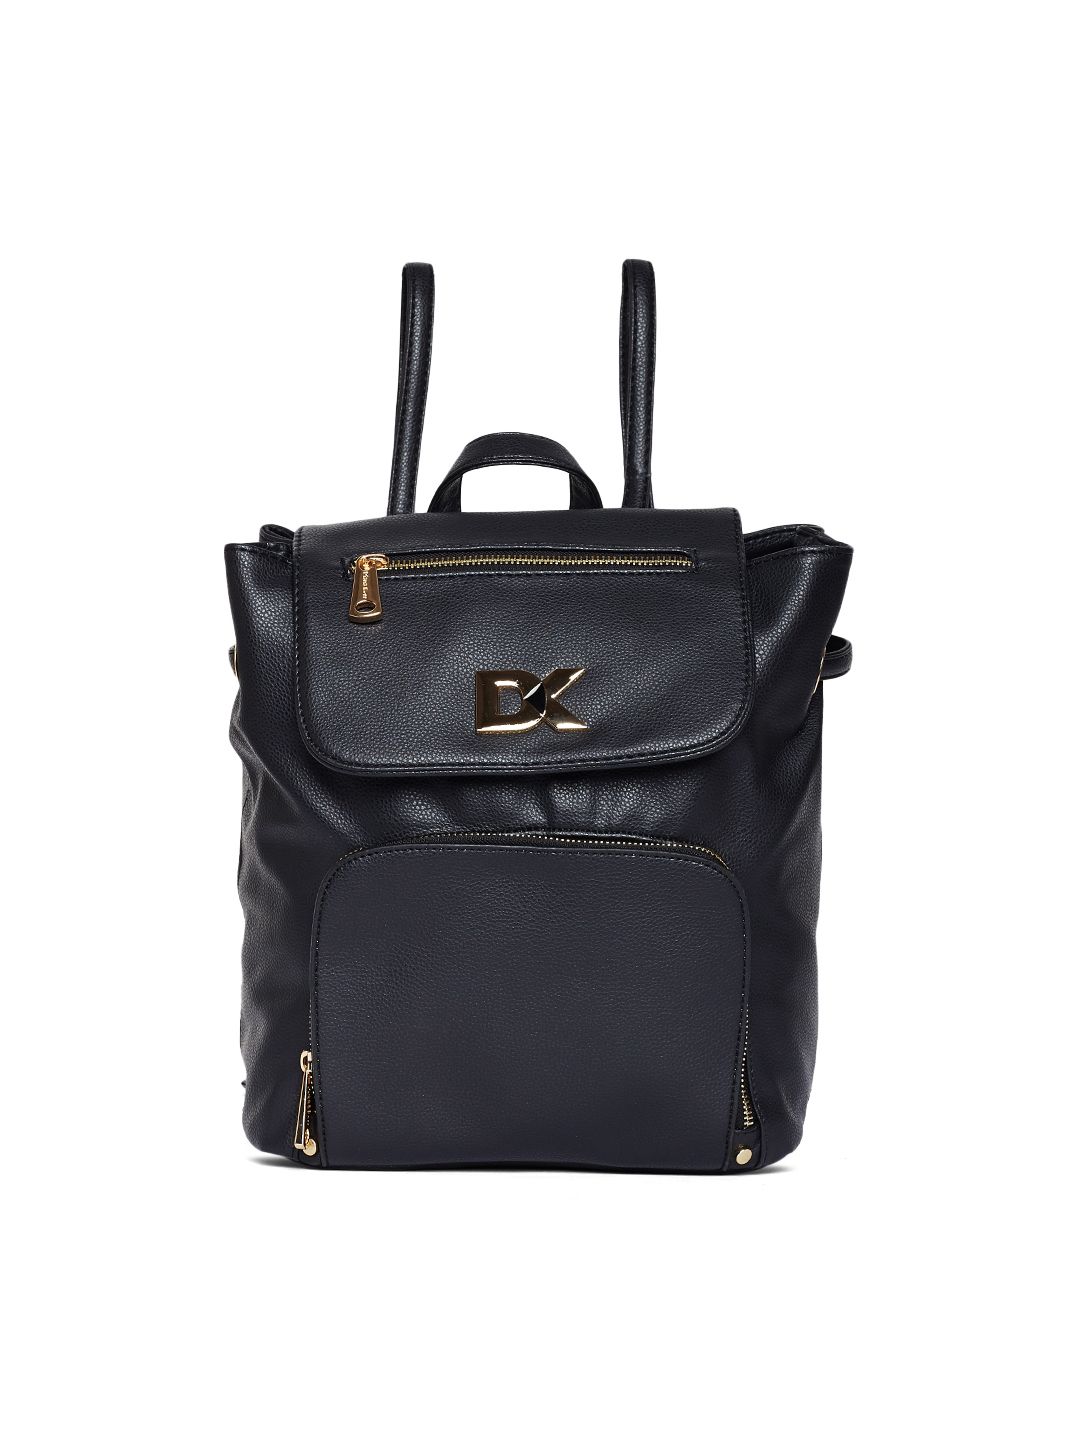 Diana Korr Women Black & Gold-Toned Solid Backpack Price in India